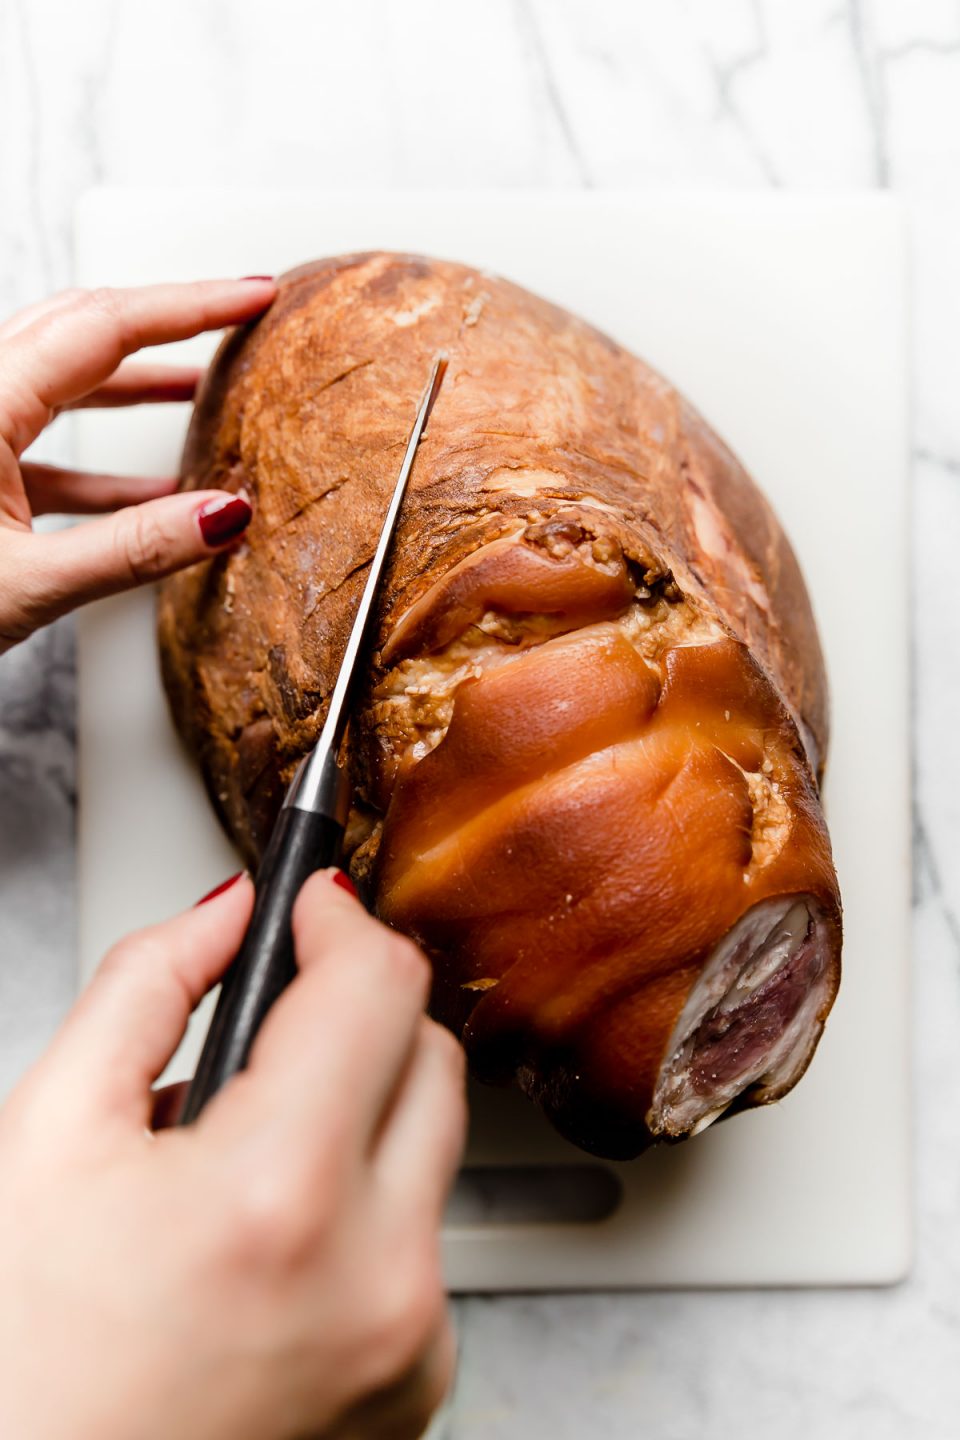 A woman's hands shown using a paring knife to score the surface of a ham shank. 